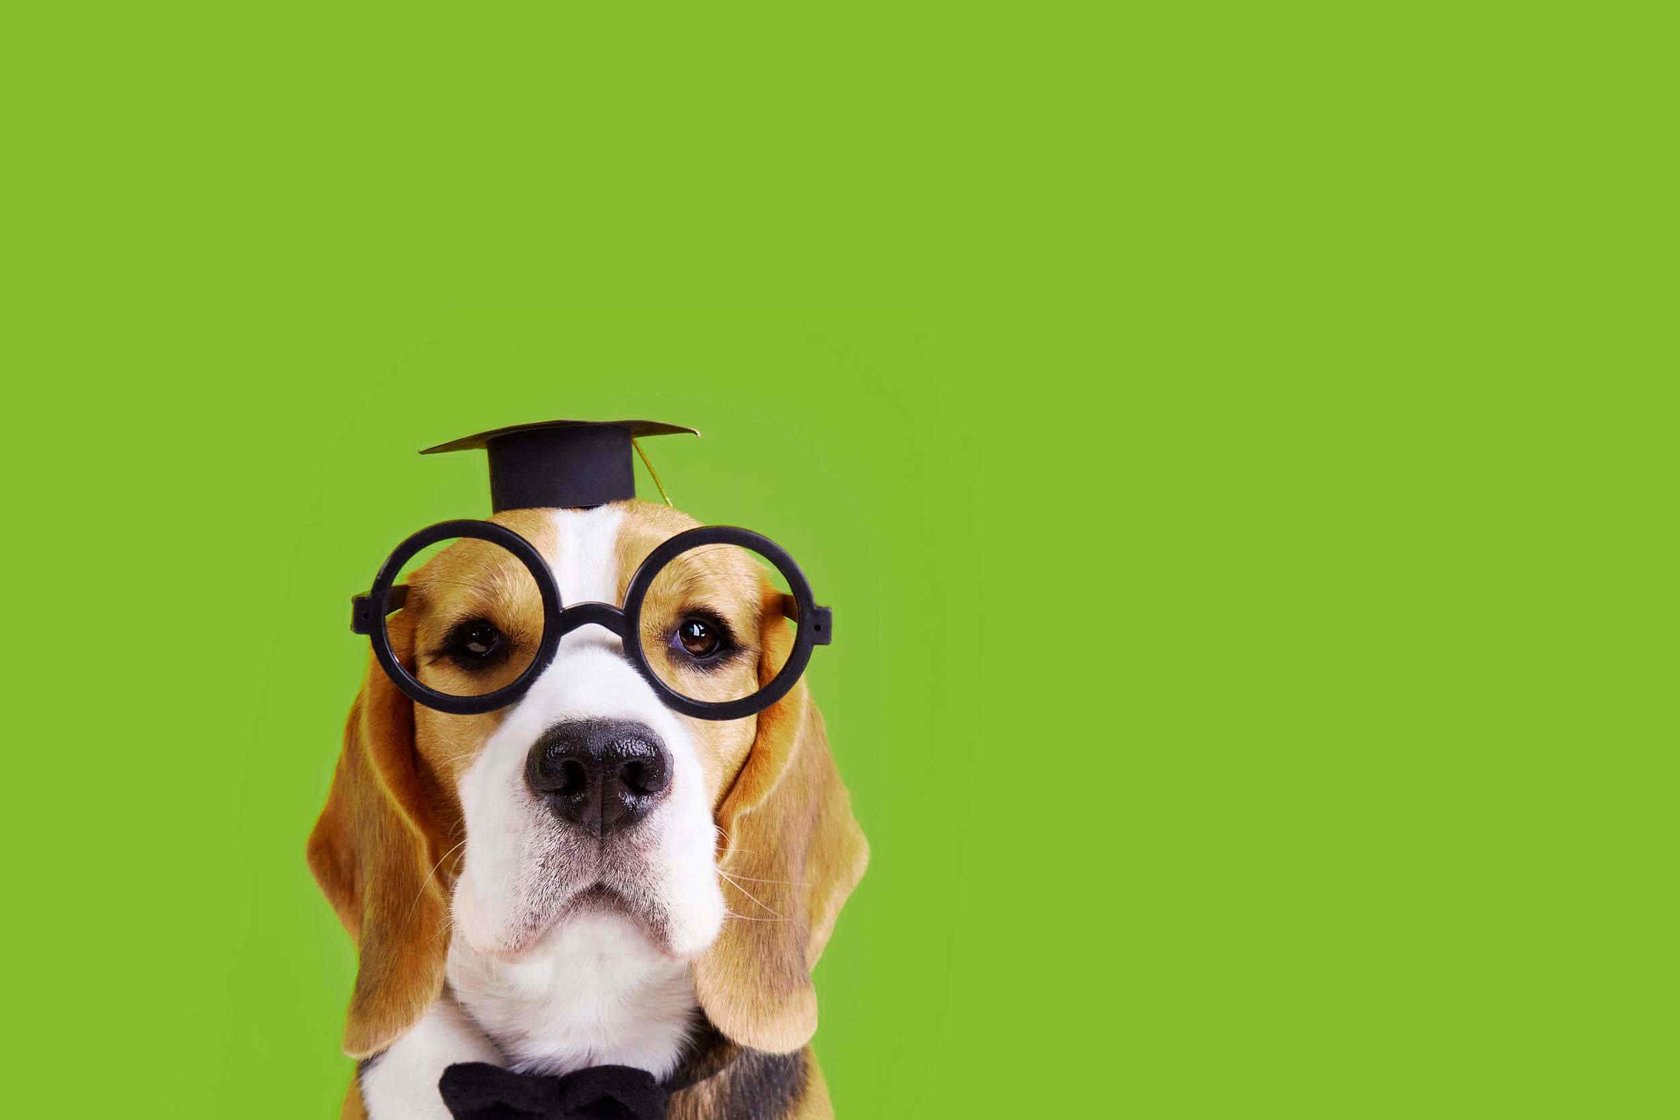 Image of a basset hound with glasses and a mortar board against a green background 